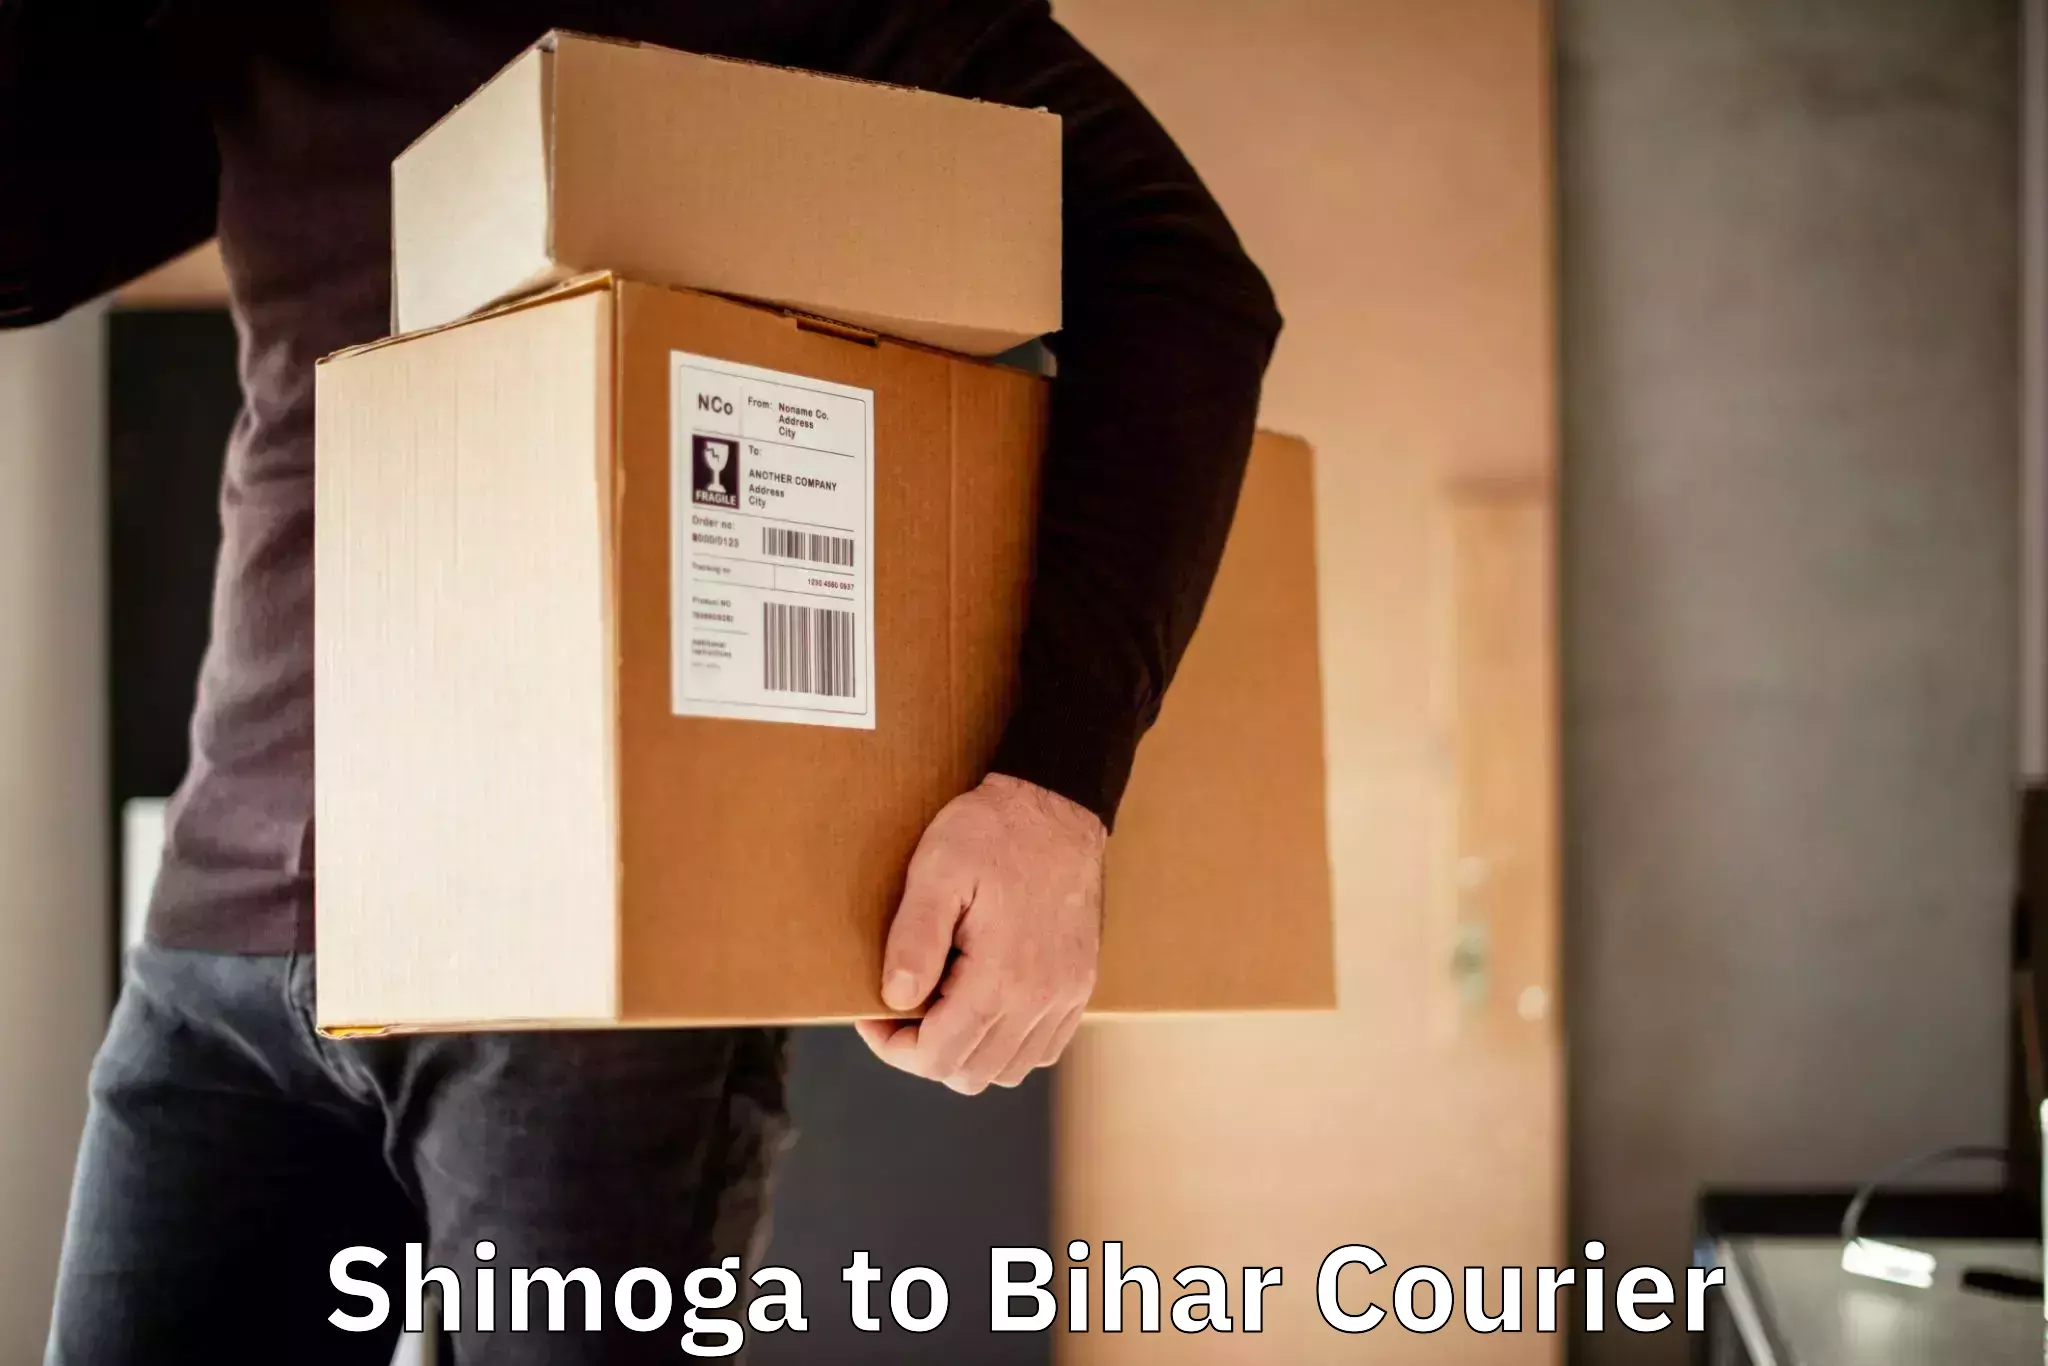 Business delivery service Shimoga to Bihar